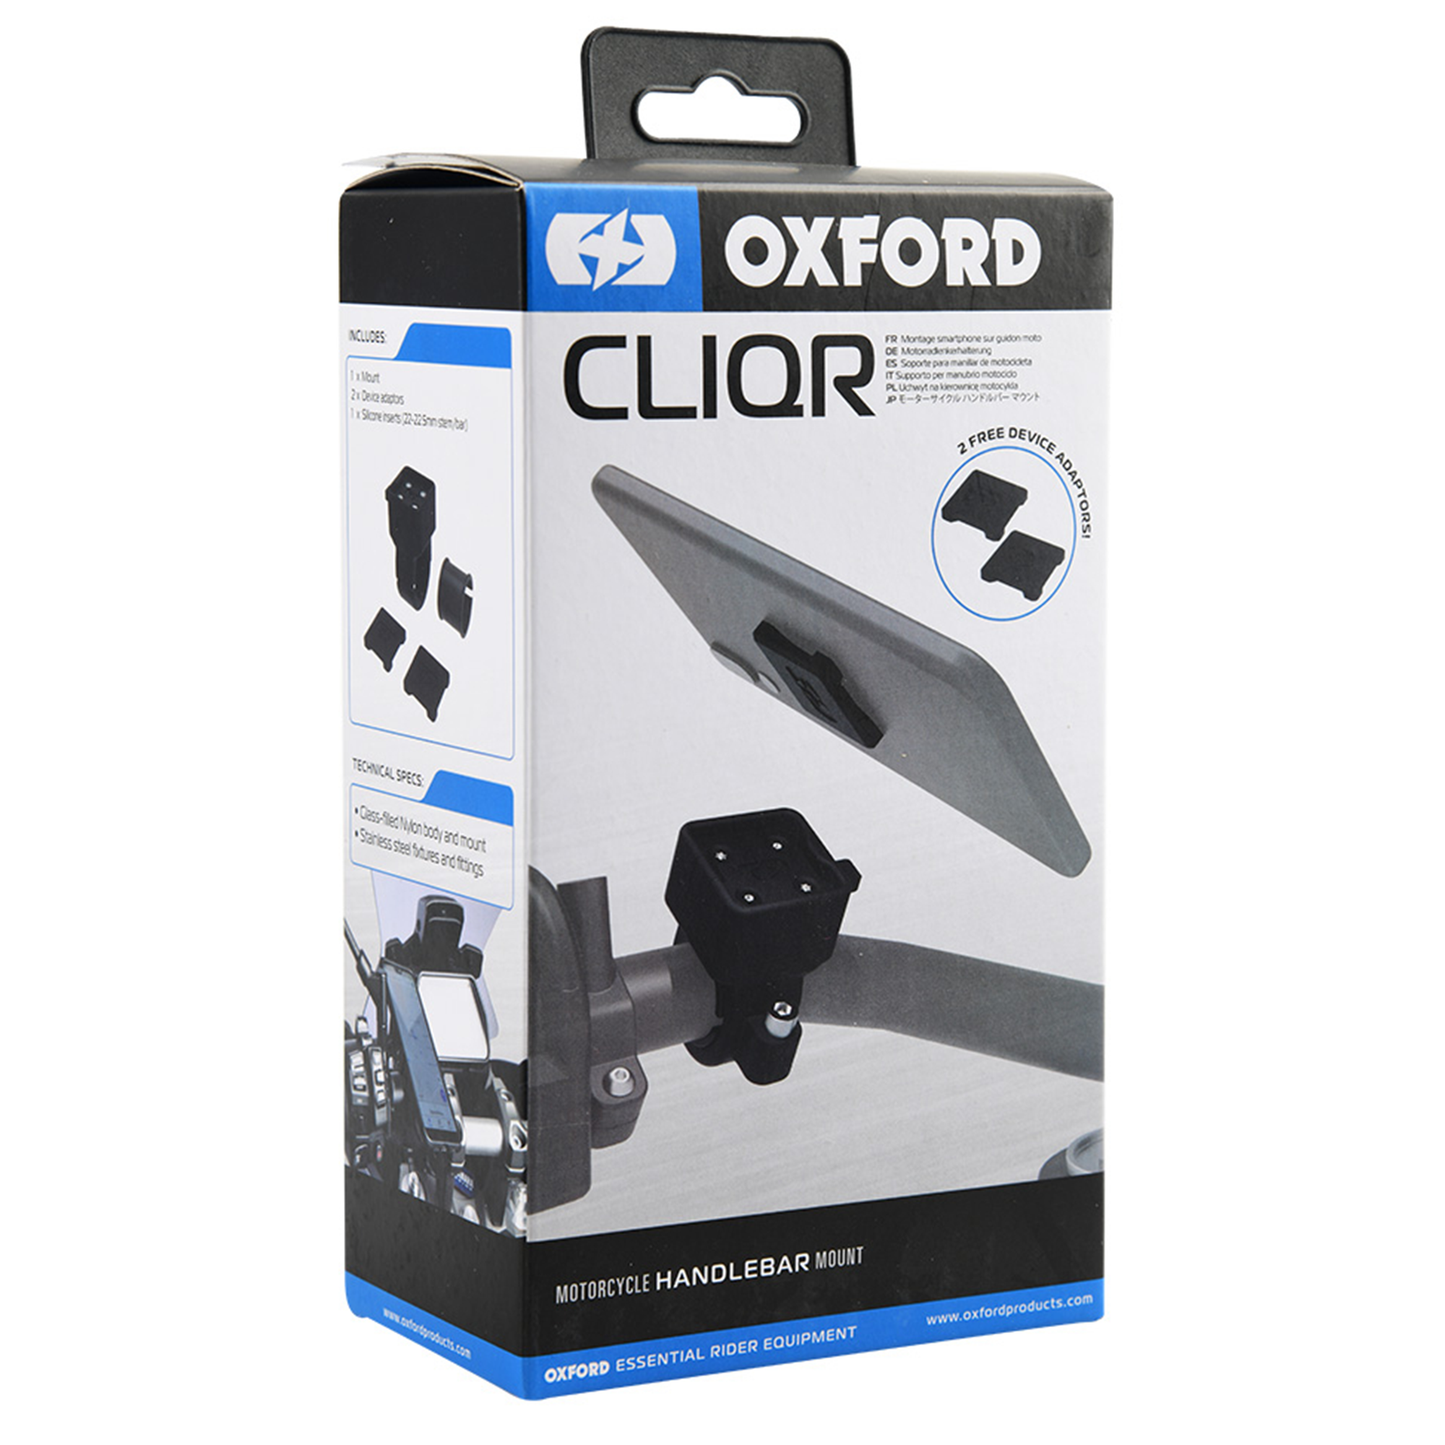 Oxford CLIQR Motorcycle Handlebar Mount